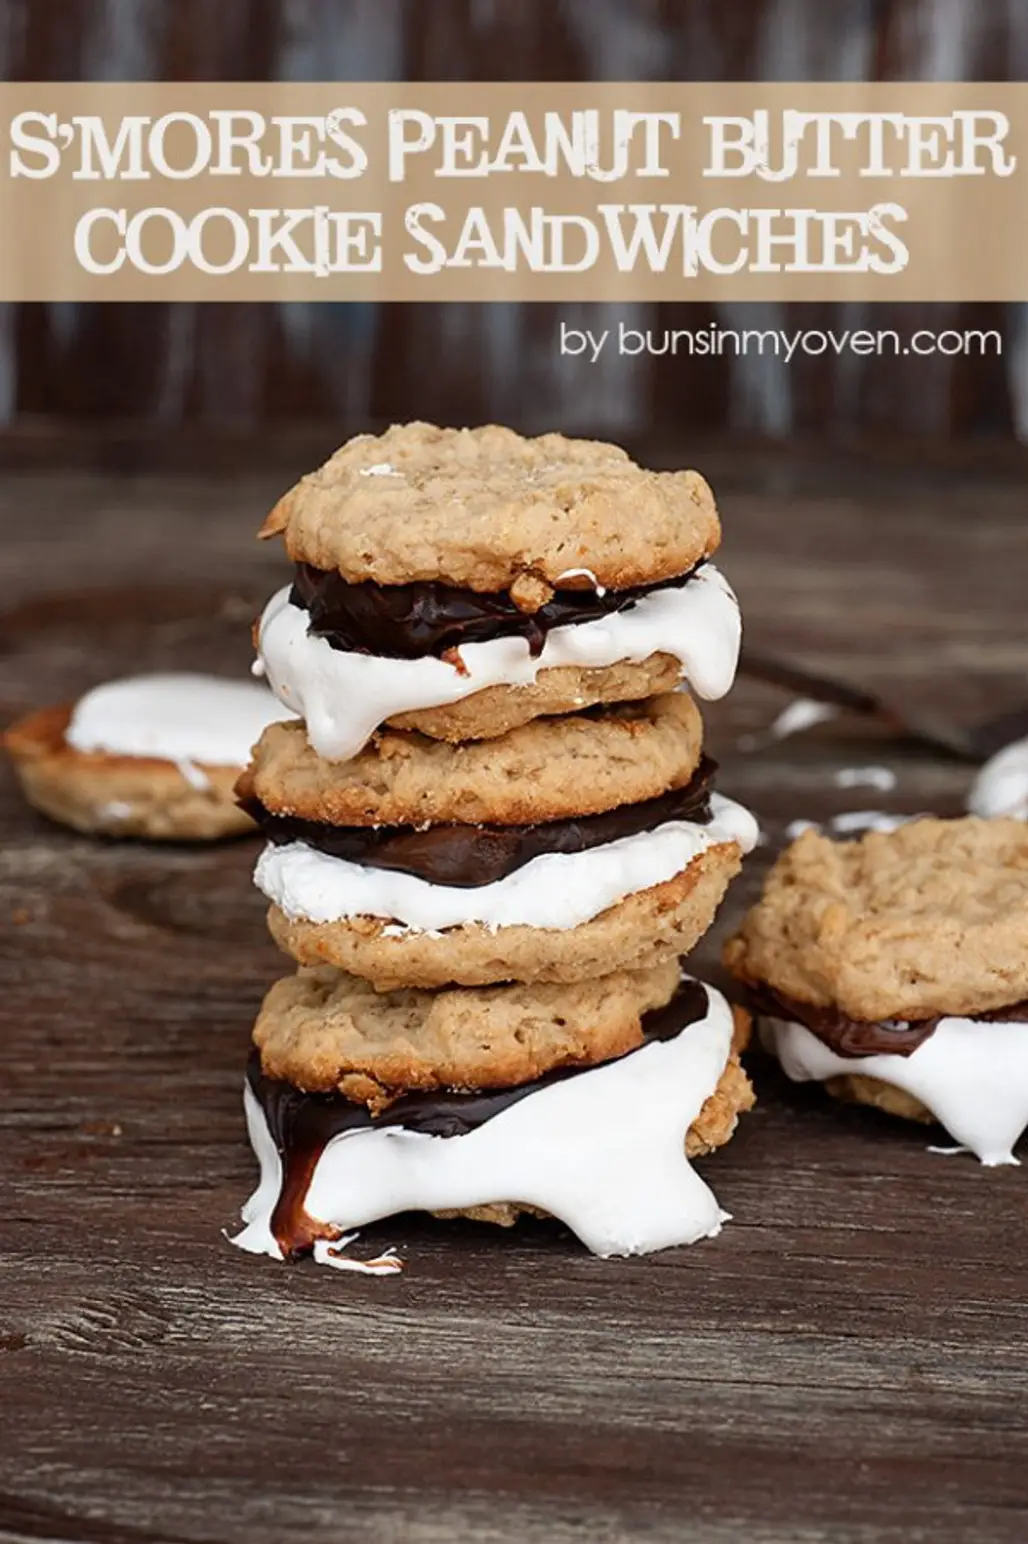 S'mores Peanut Butter Cookie Sandwiches